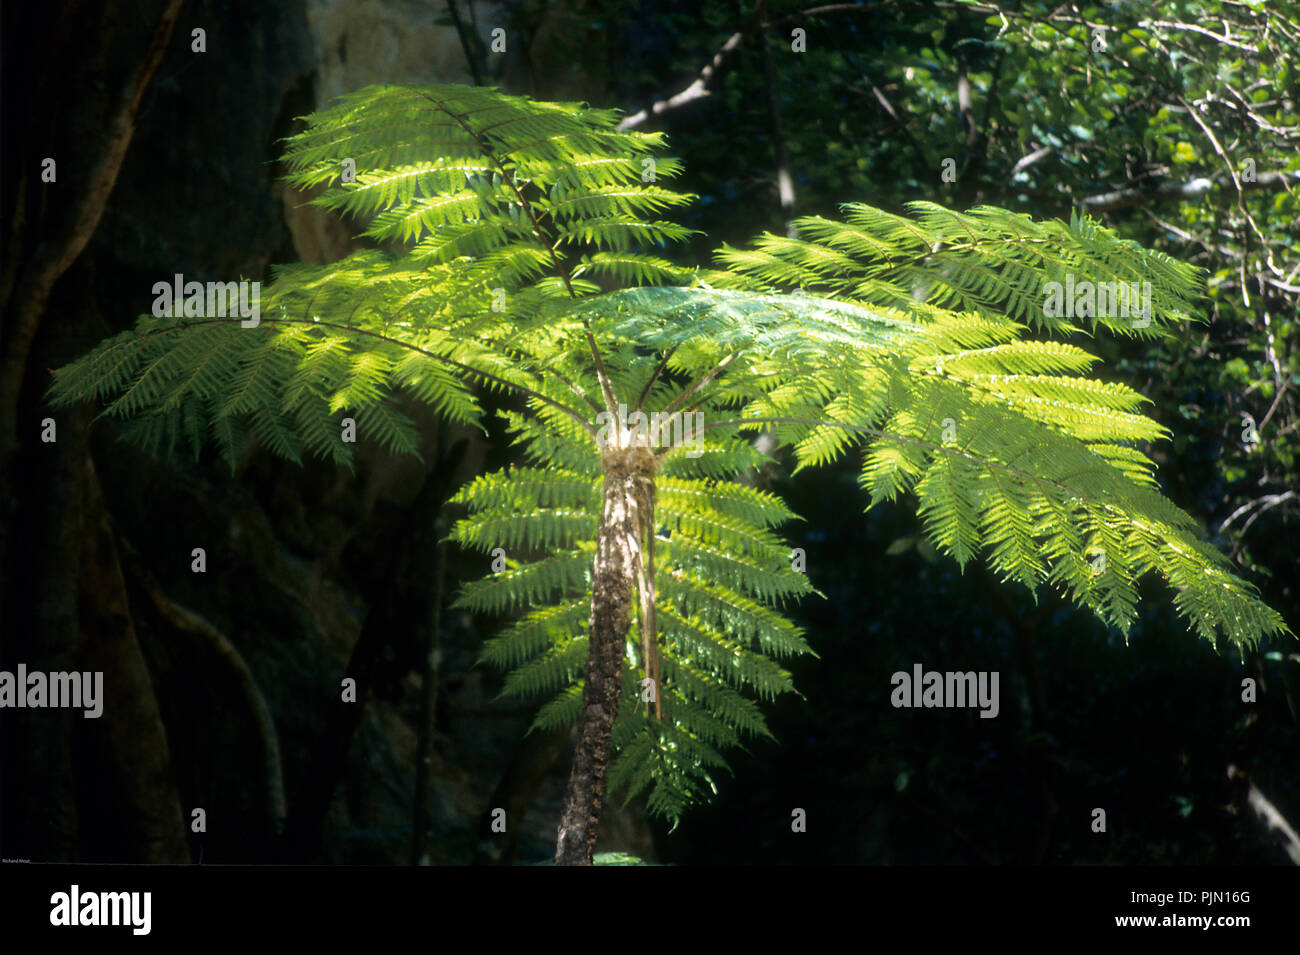 A tree fern's fronds caught in bright sunlight Stock Photo